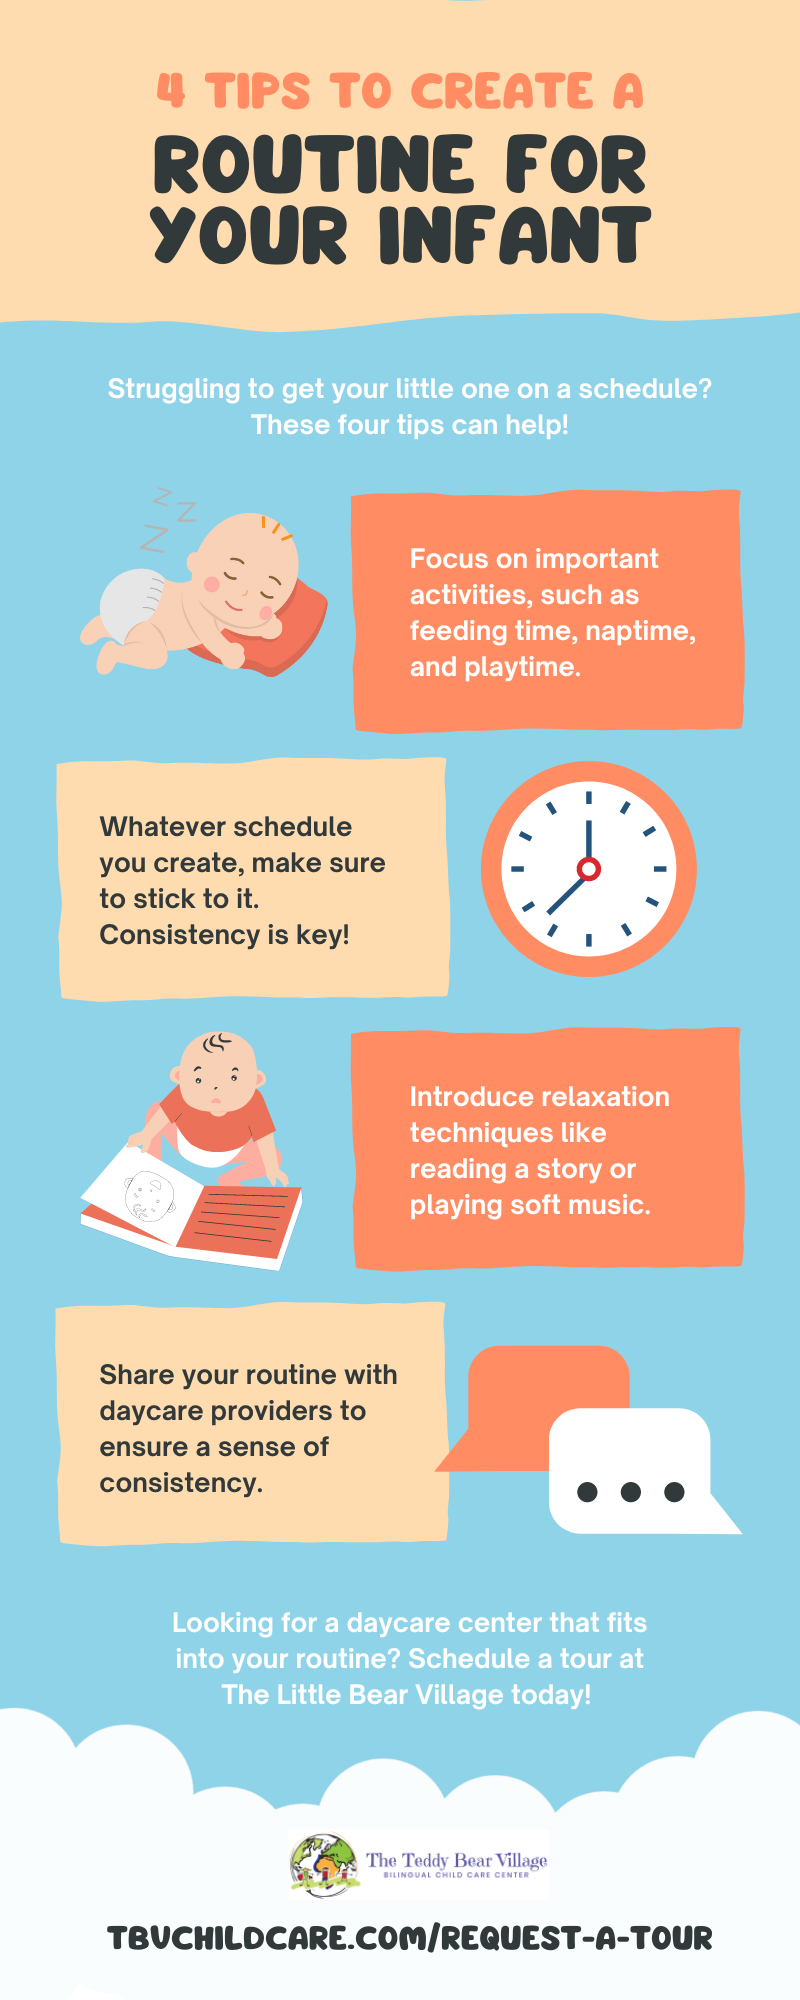 How To Prepare for Safe Diaper Changing and Playtime